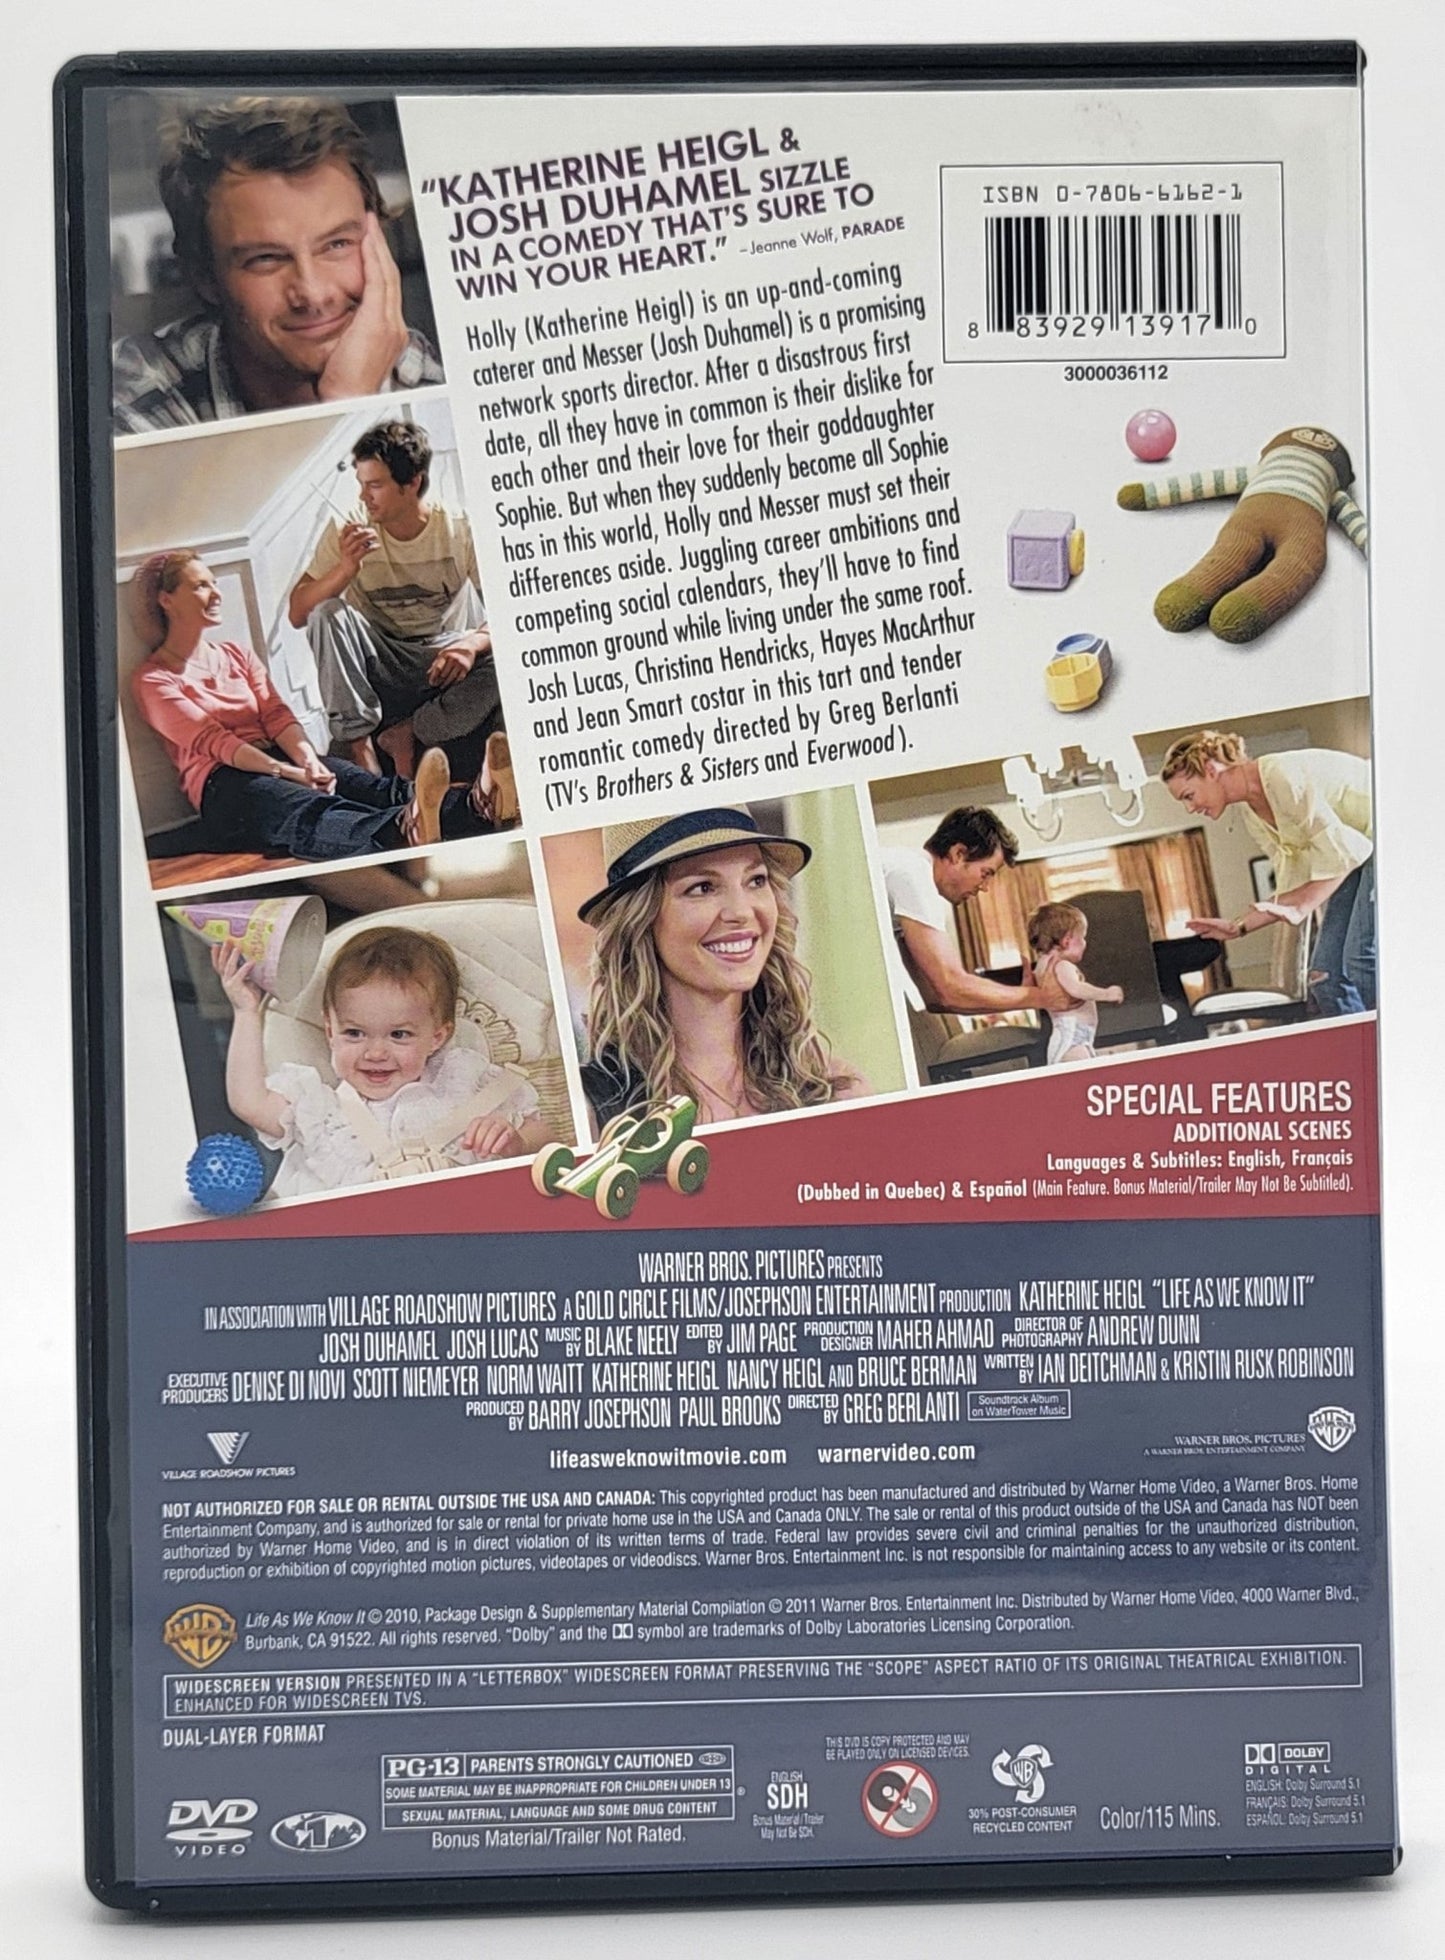 Warner Brother Family Entertainment - Life as we know it | DVD | Warner Brothers - DVD - Steady Bunny Shop